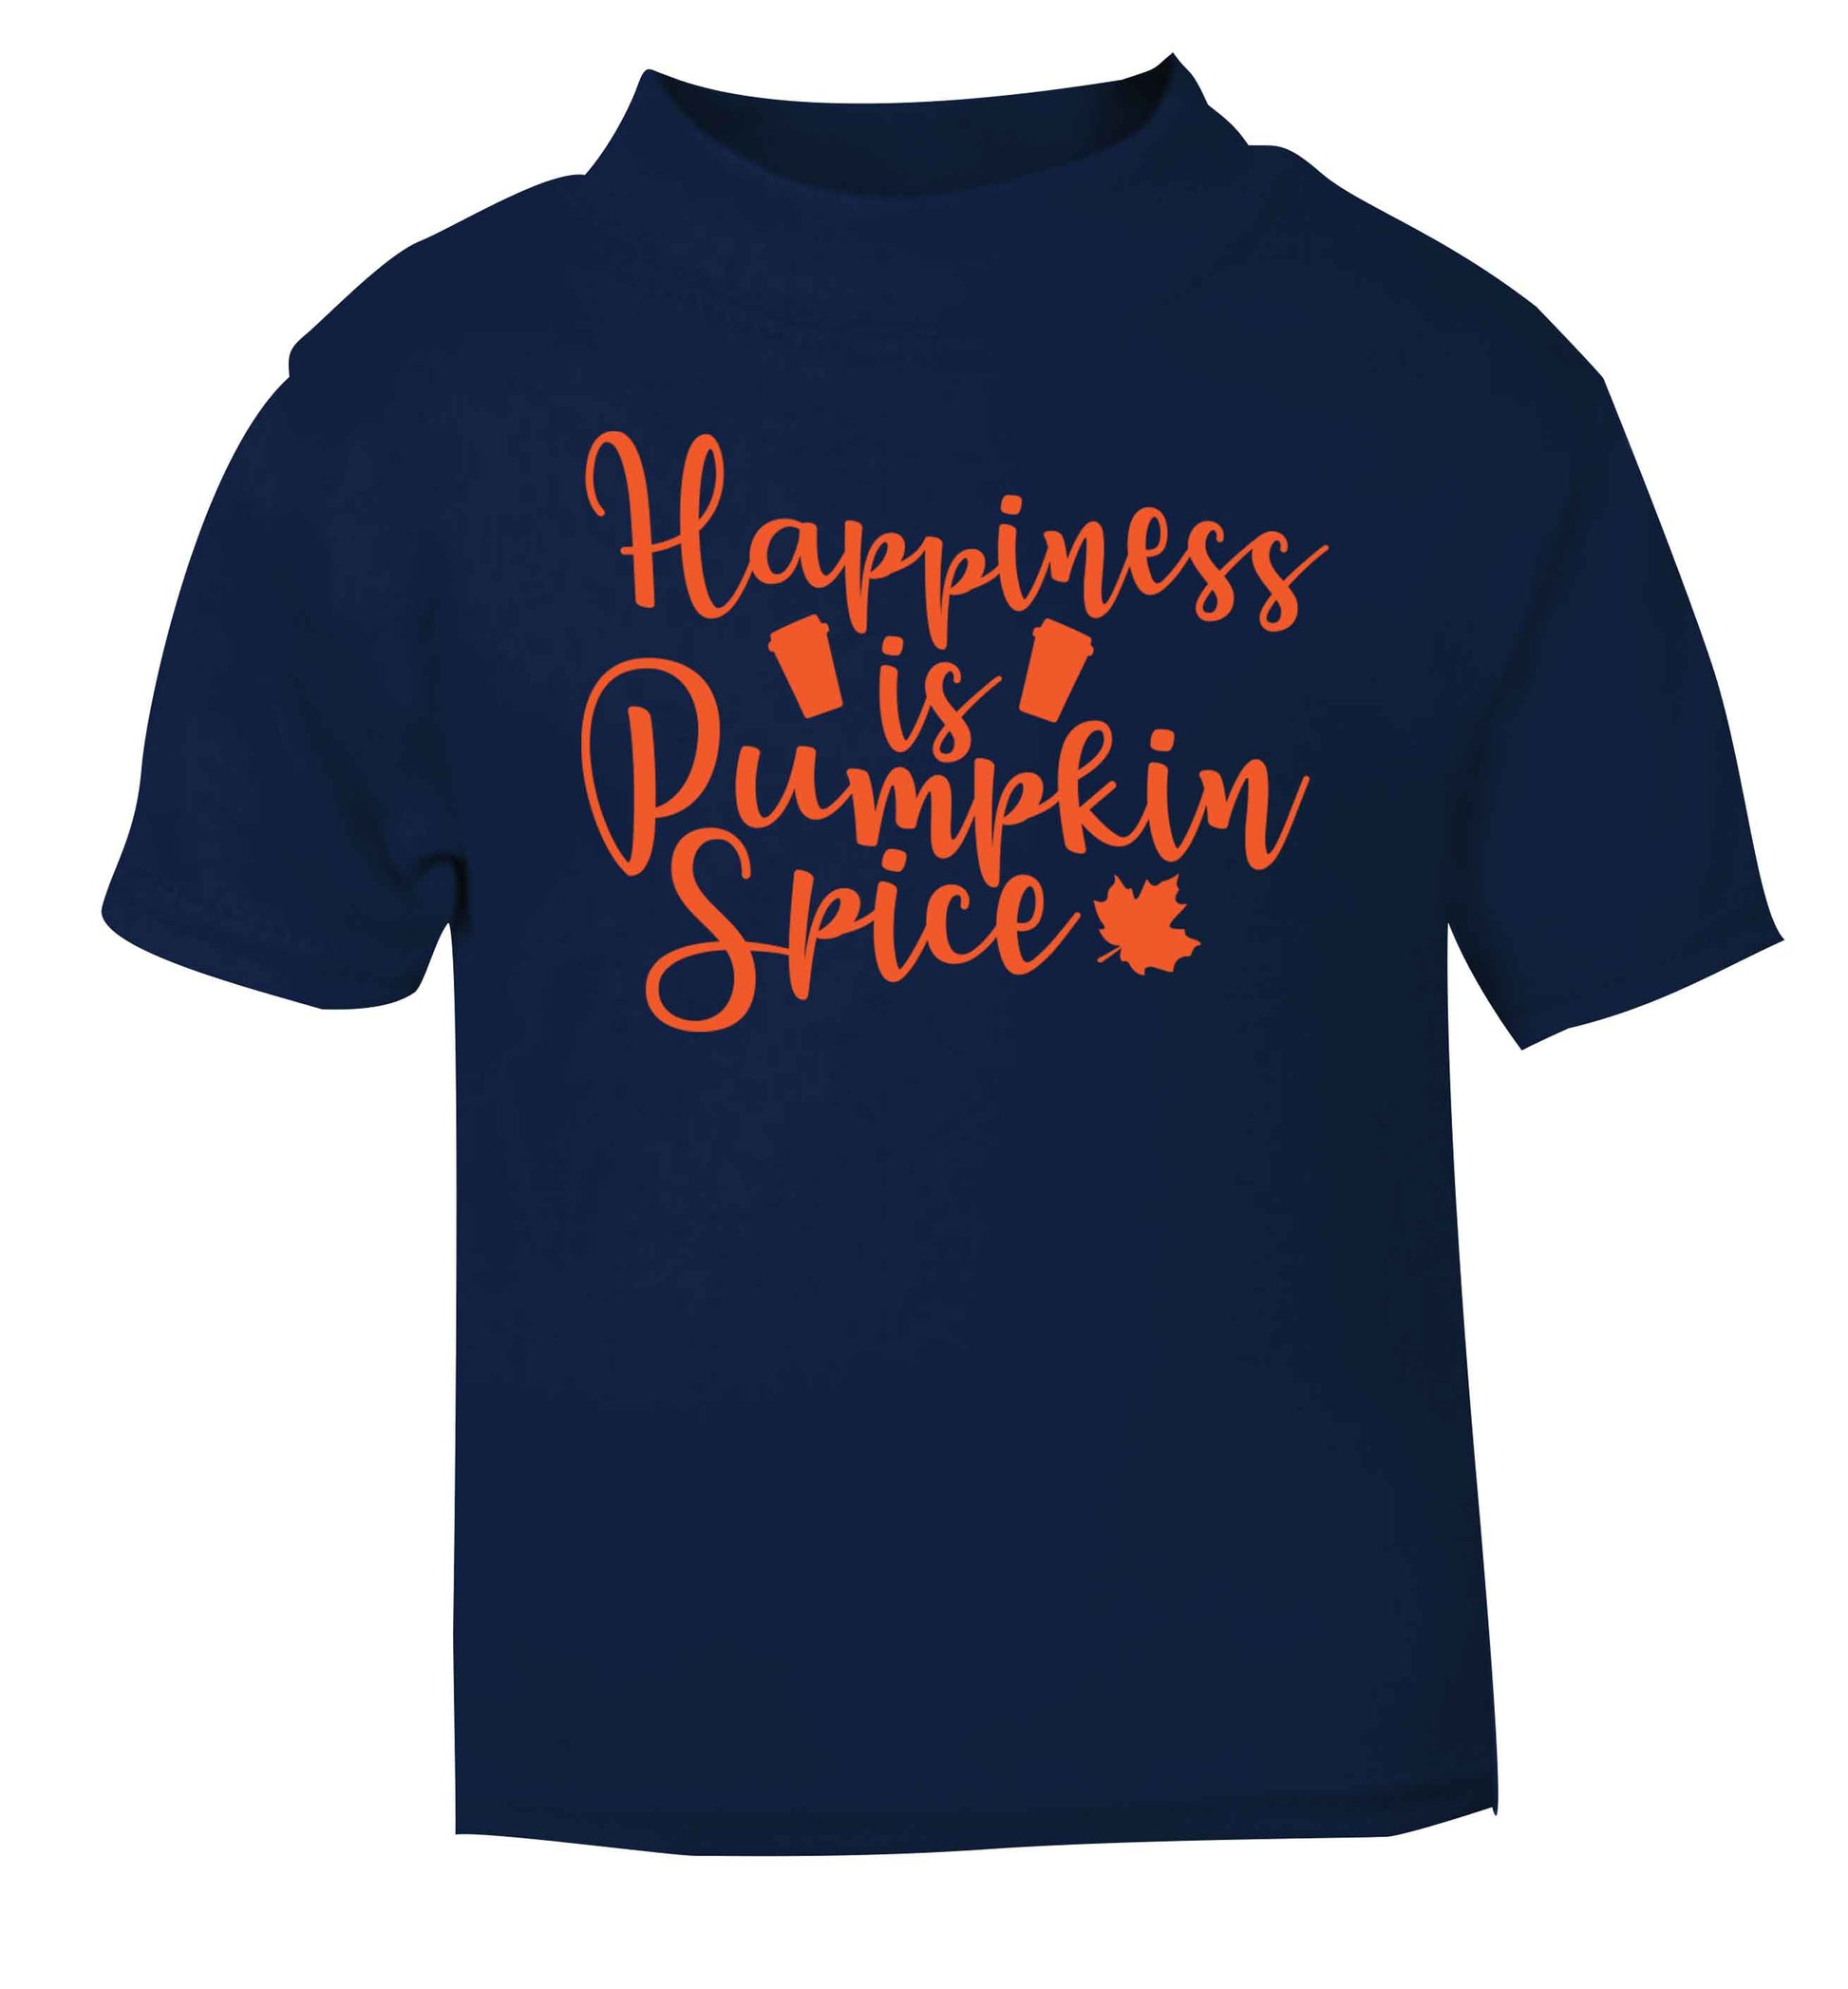 Happiness Pumpkin Spice navy baby toddler Tshirt 2 Years